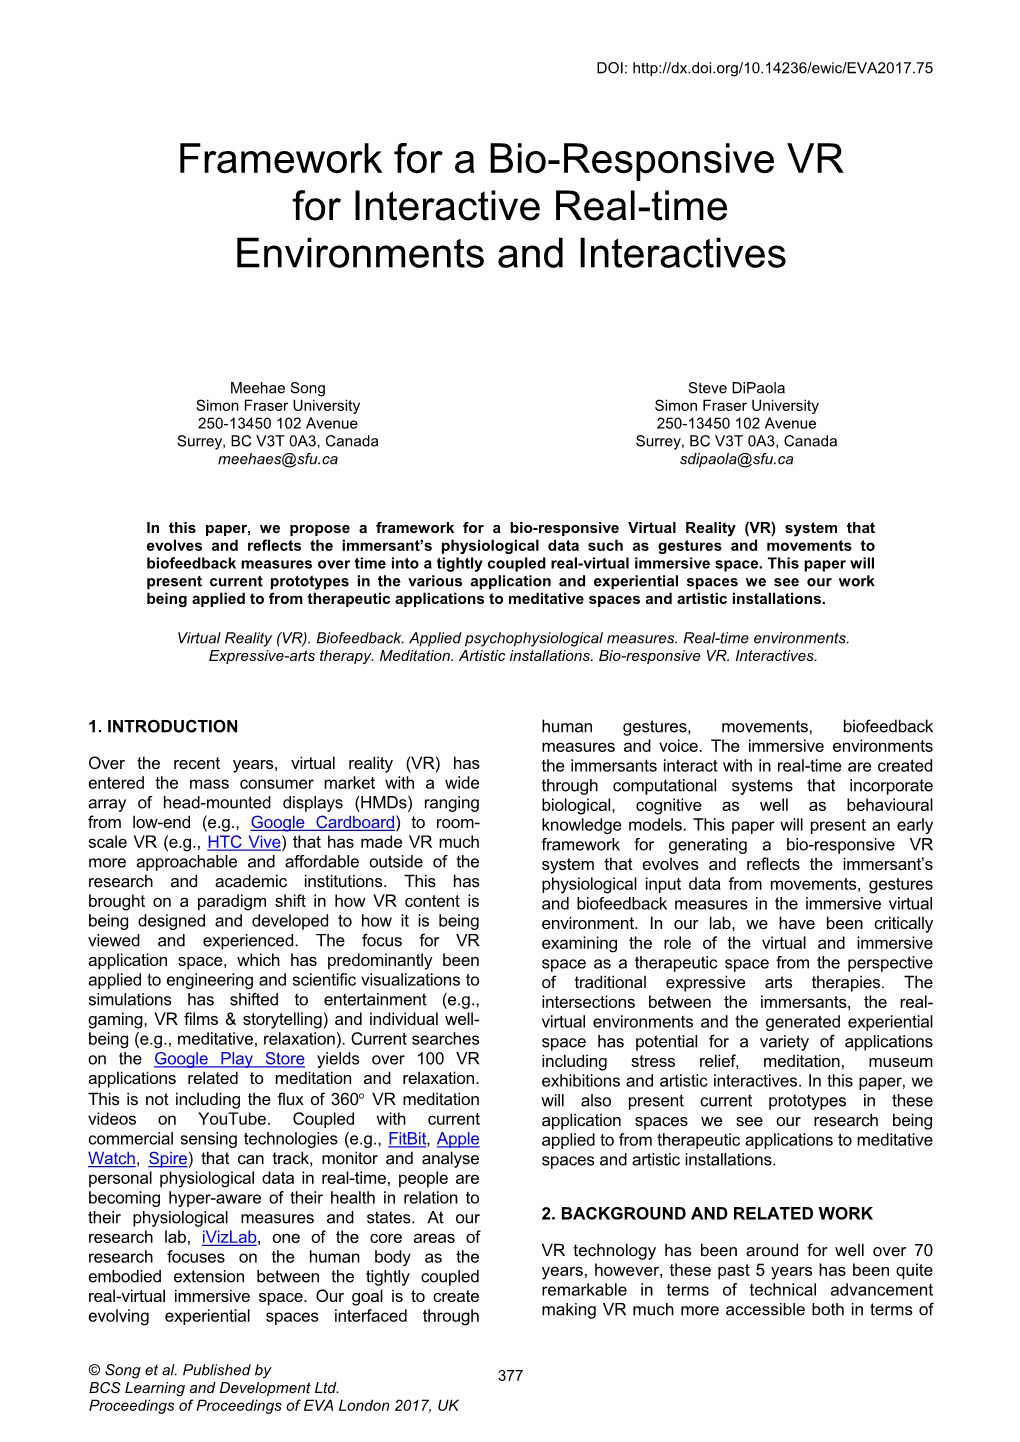 Framework for a Bio-Responsive VR for Interactive Real-Time Environments and Interactives